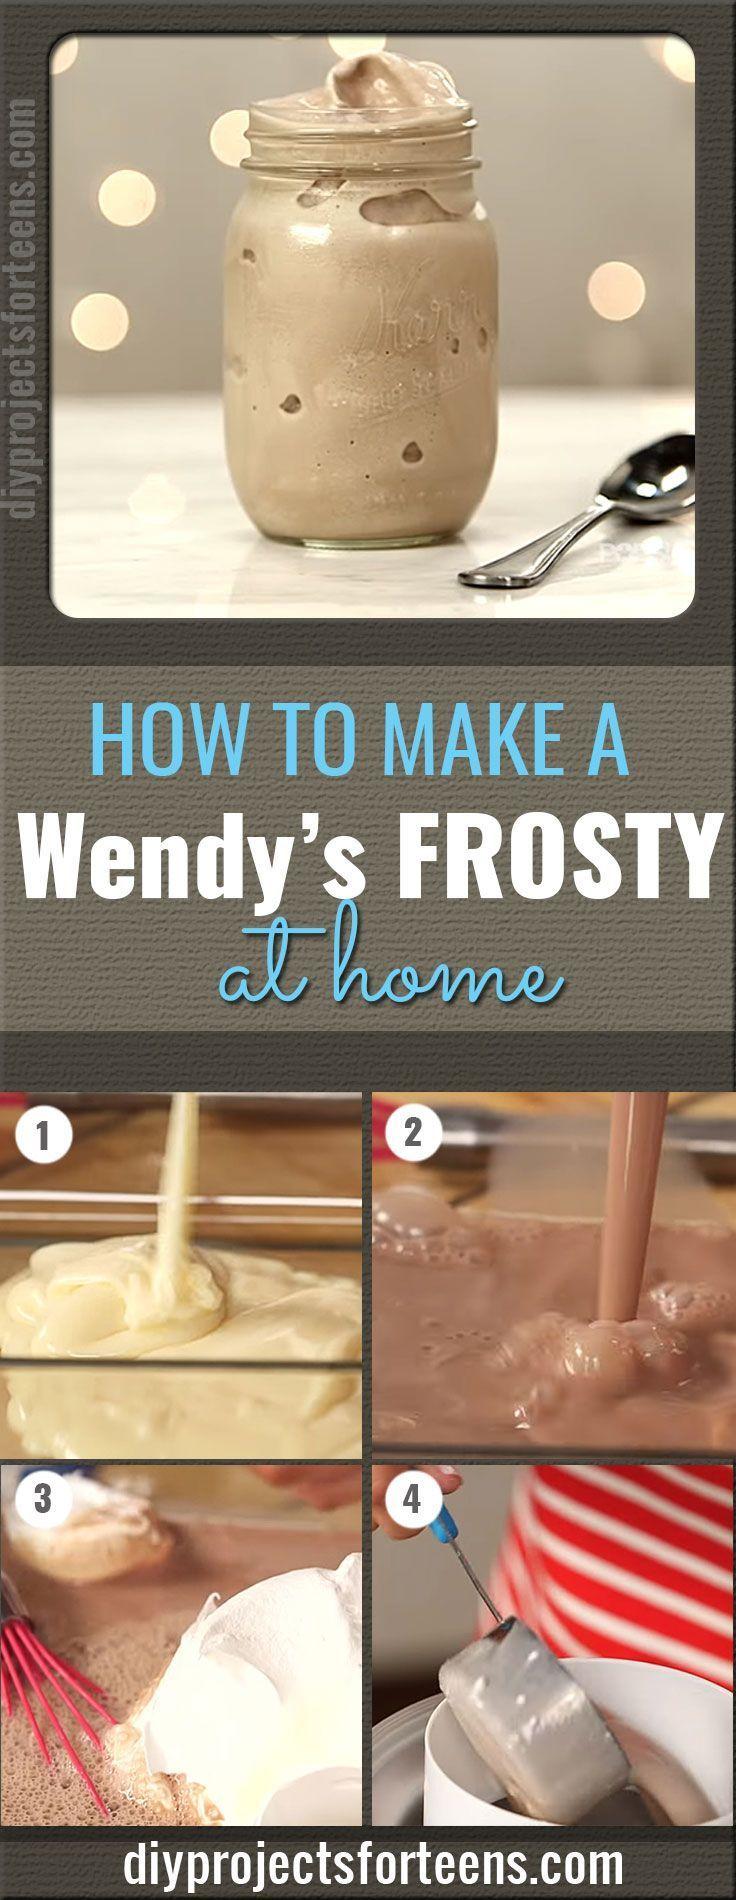 Hochzeit - Make A Wendy's Frosty At Home With Only 3 Ingredients